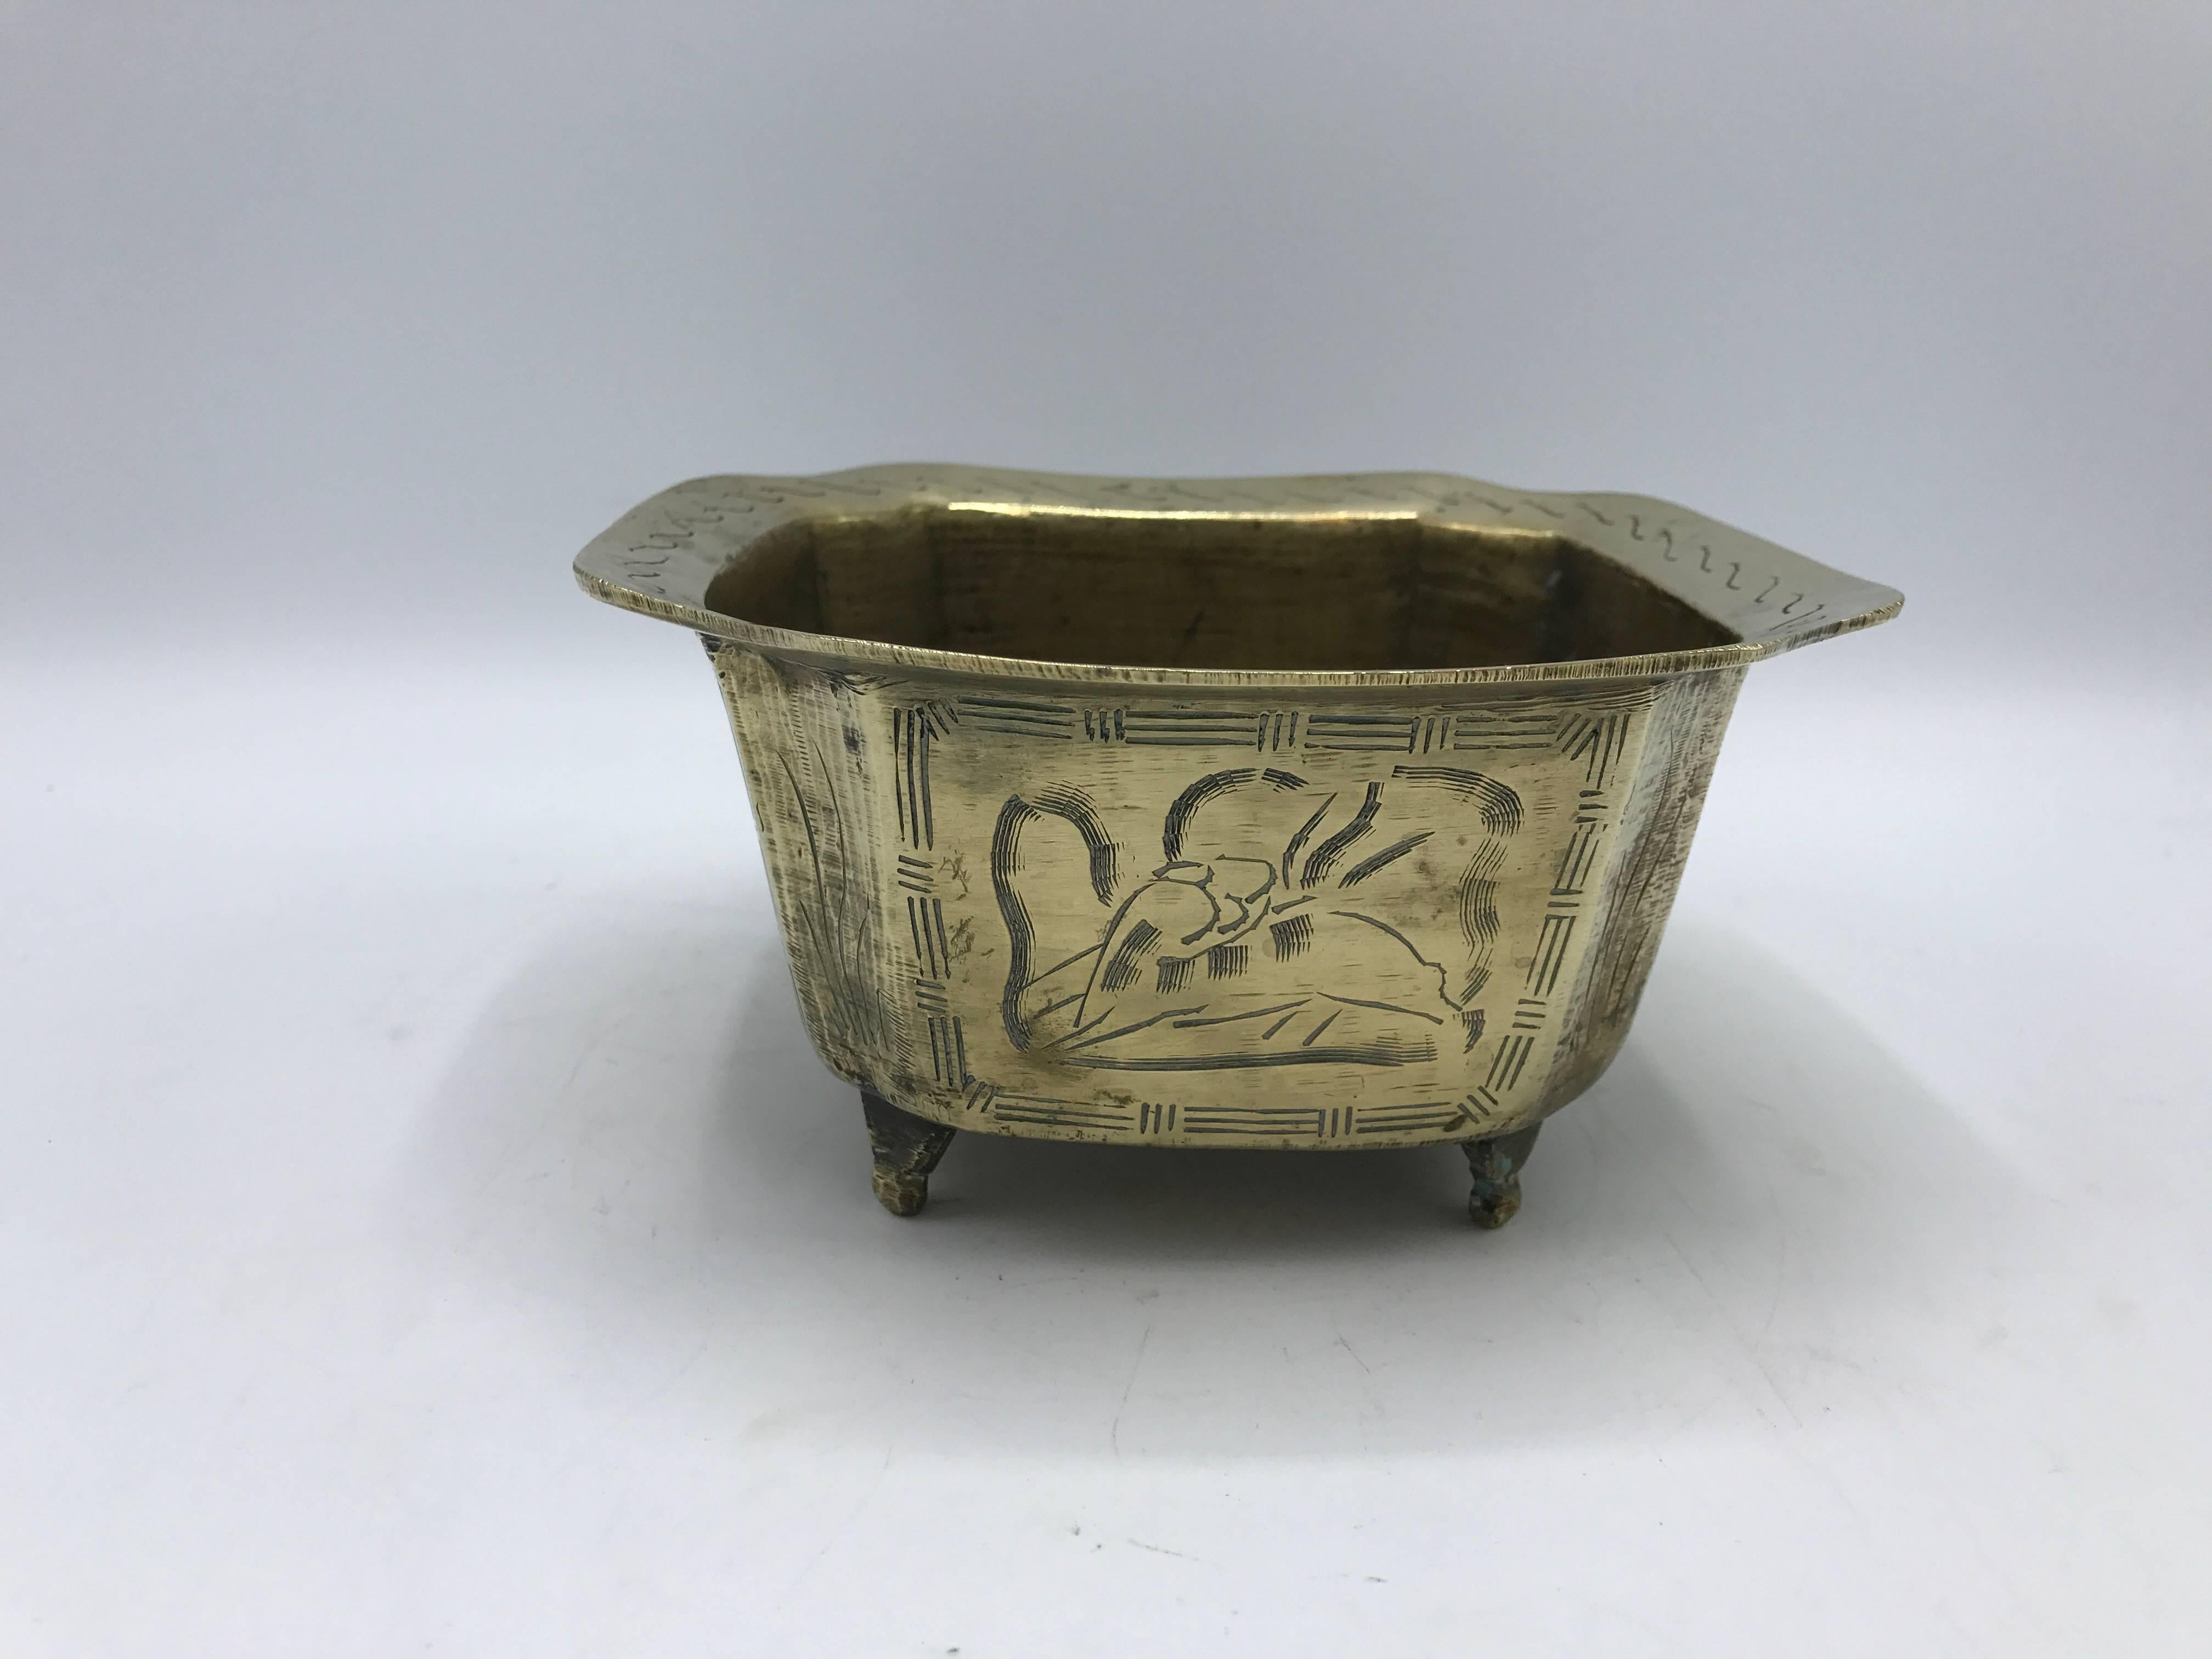 Offered is a beautiful, 1960s brass chinoiserie cachepot planter with ornate detailing on all sides. Marked 